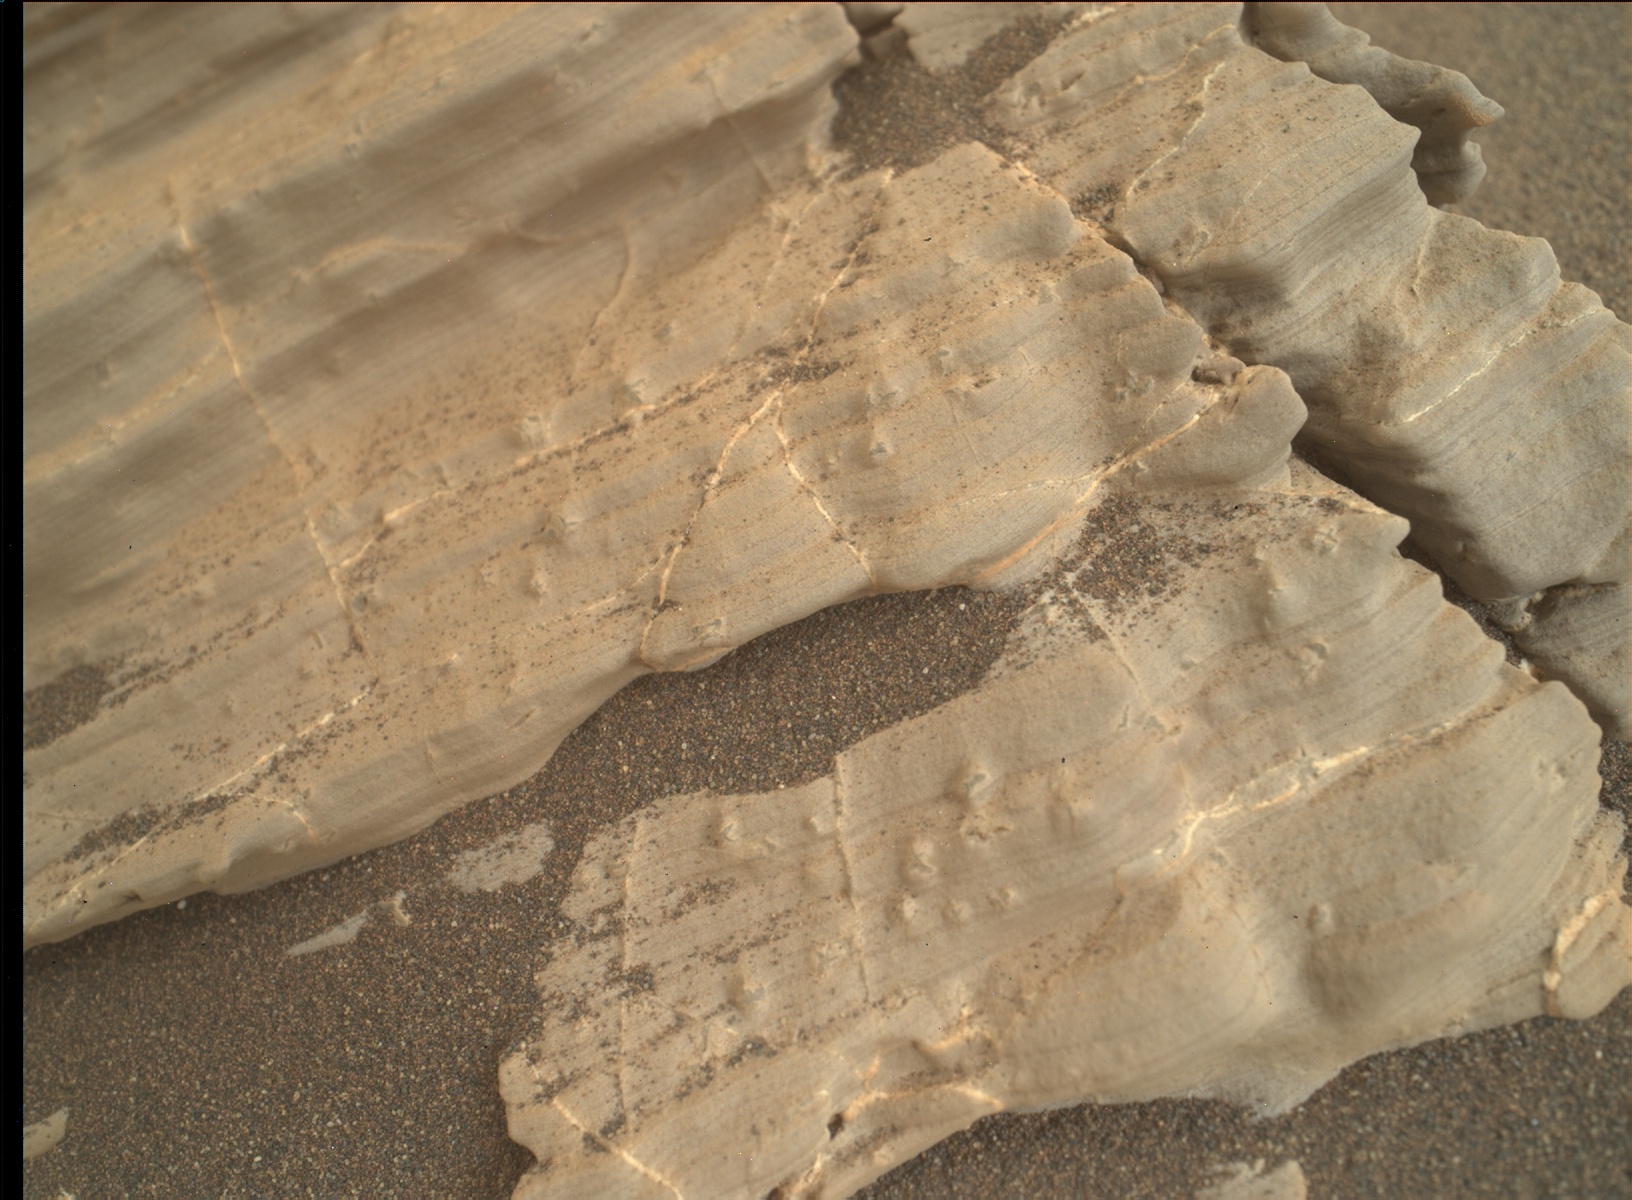 Nasa's Mars rover Curiosity acquired this image using its Mars Hand Lens Imager (MAHLI) on Sol 1925